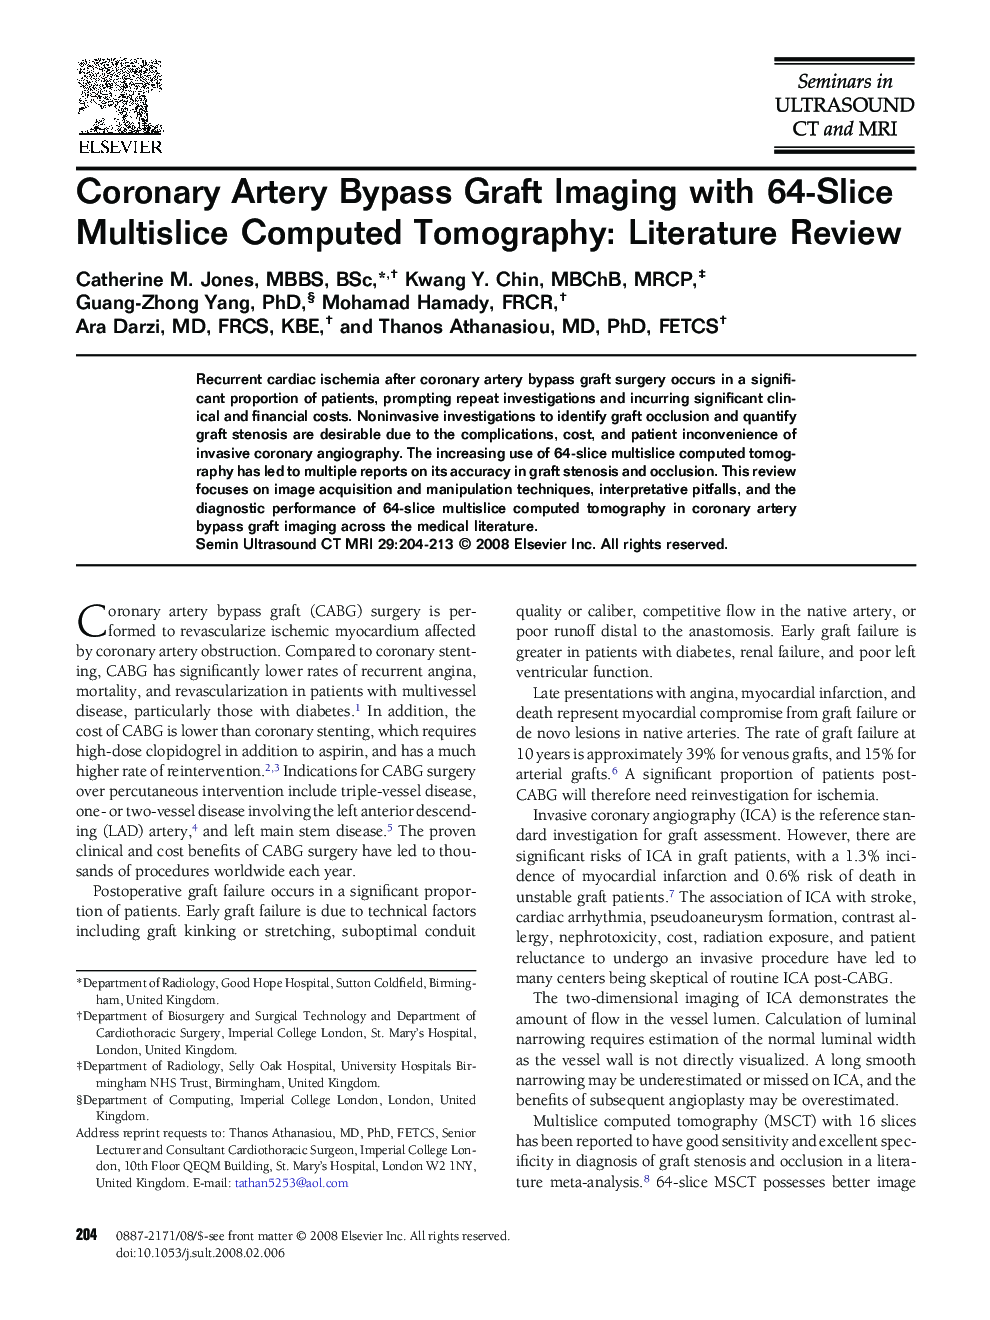 Coronary Artery Bypass Graft Imaging with 64-Slice Multislice Computed Tomography: Literature Review